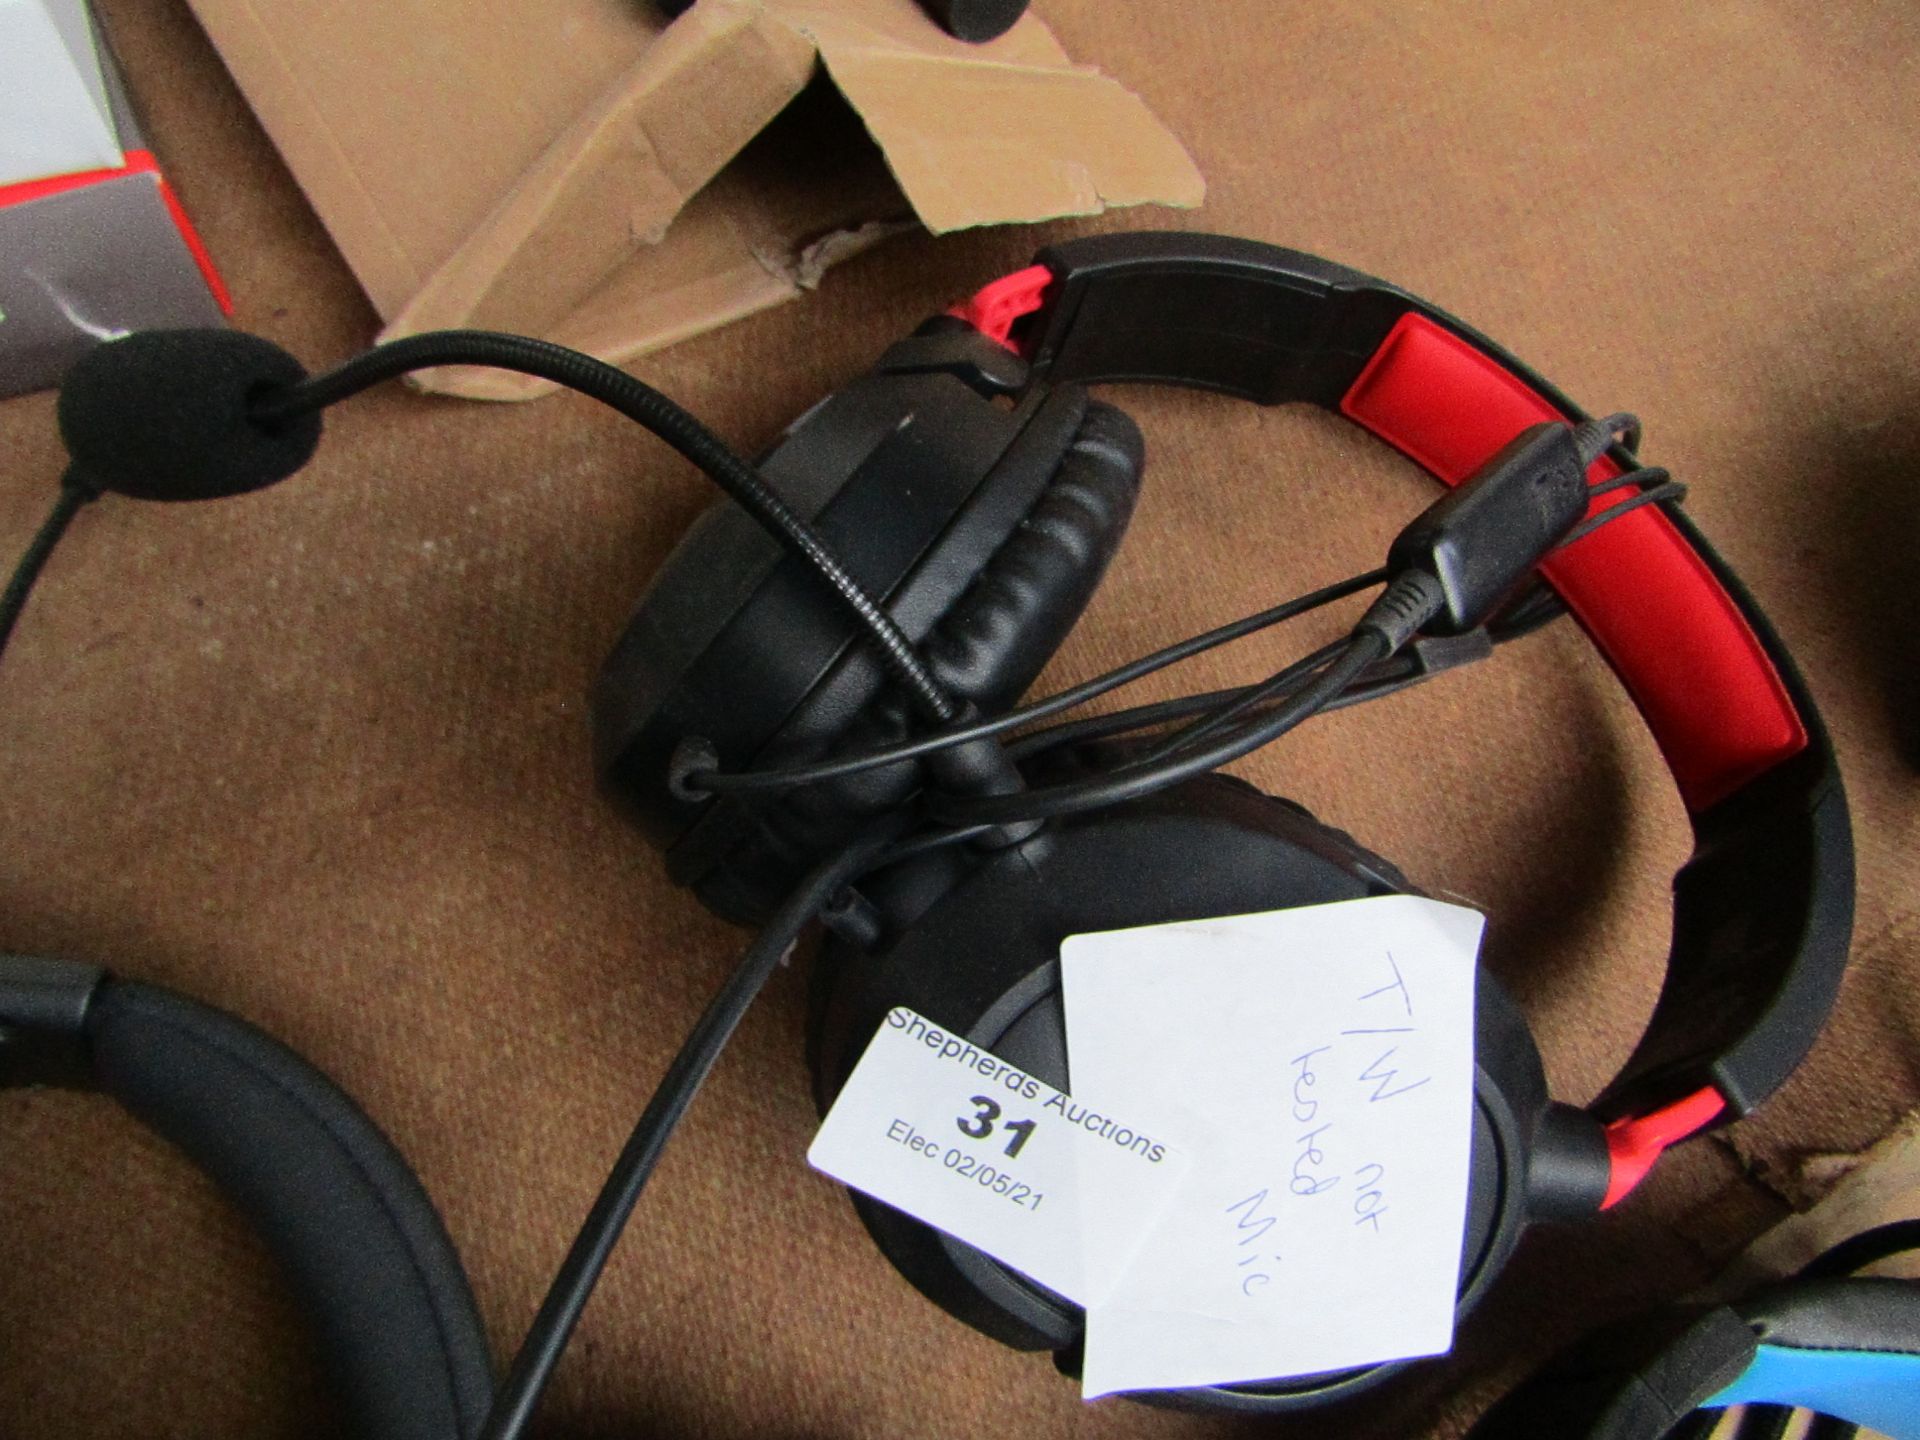 Turtle Beach Gaming Headset, Sound Works, Not Tested Mic